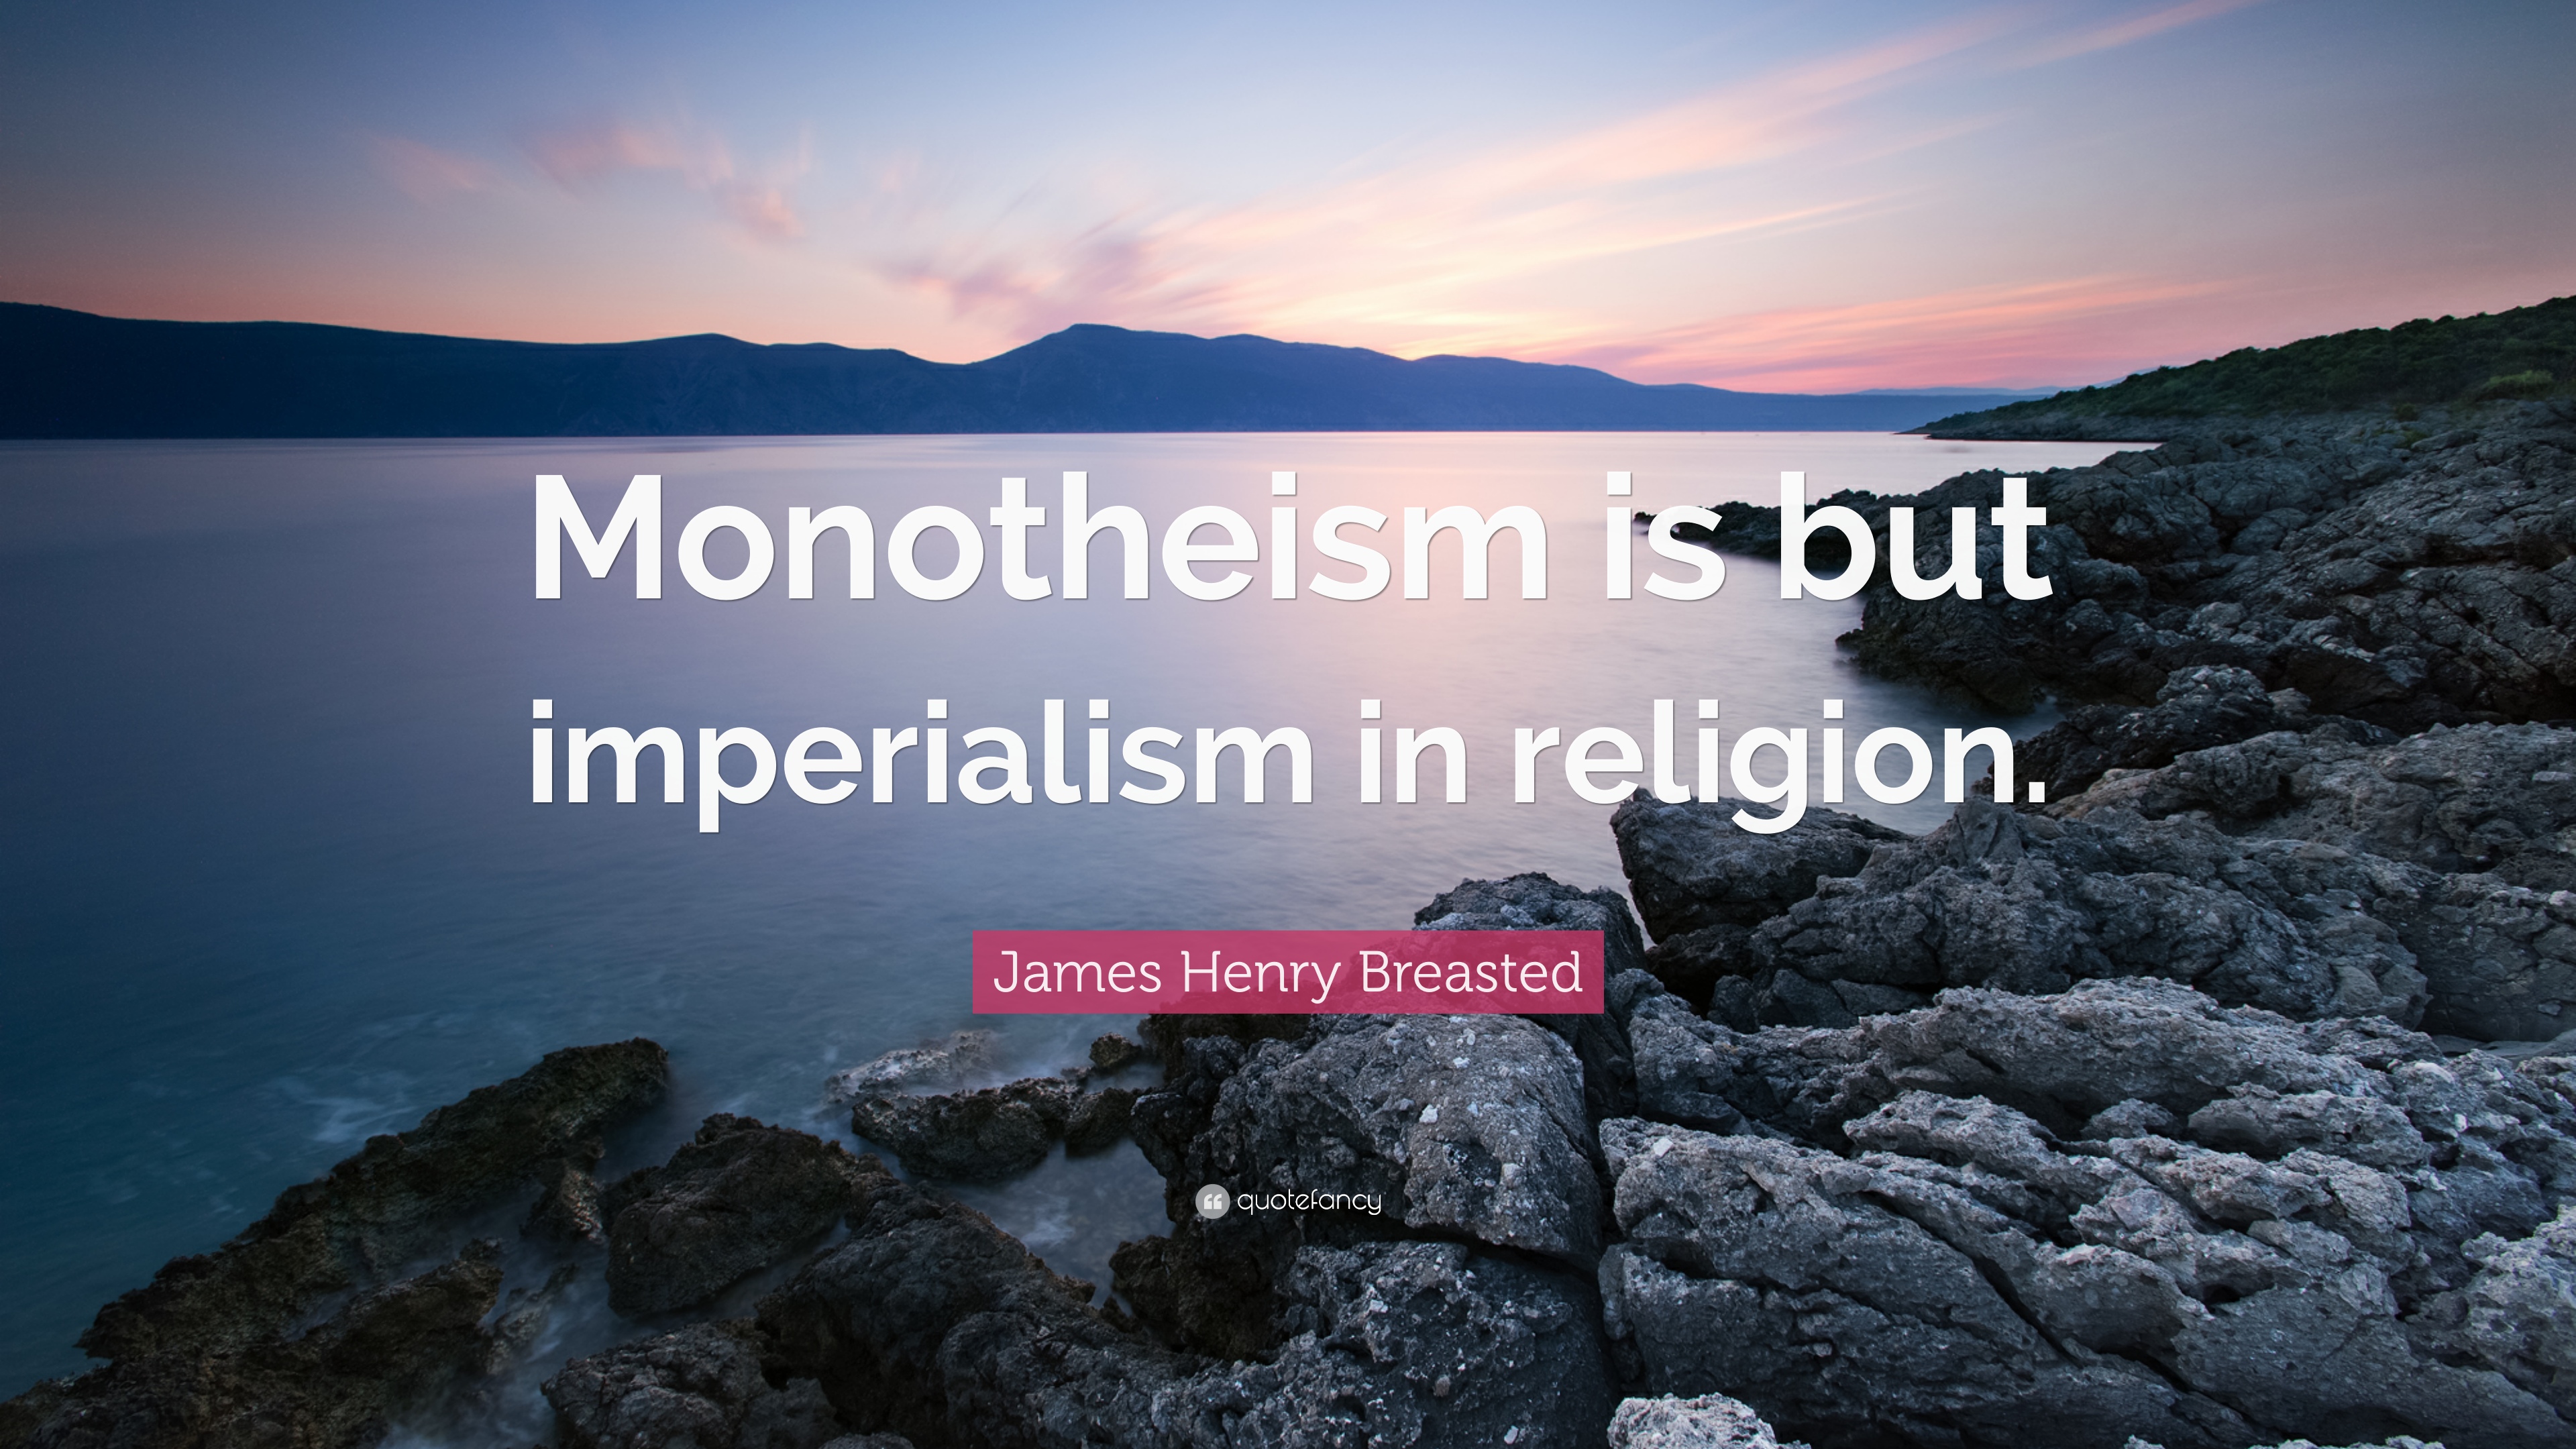 James Henry Breasted Quote: “Monotheism is but imperialism